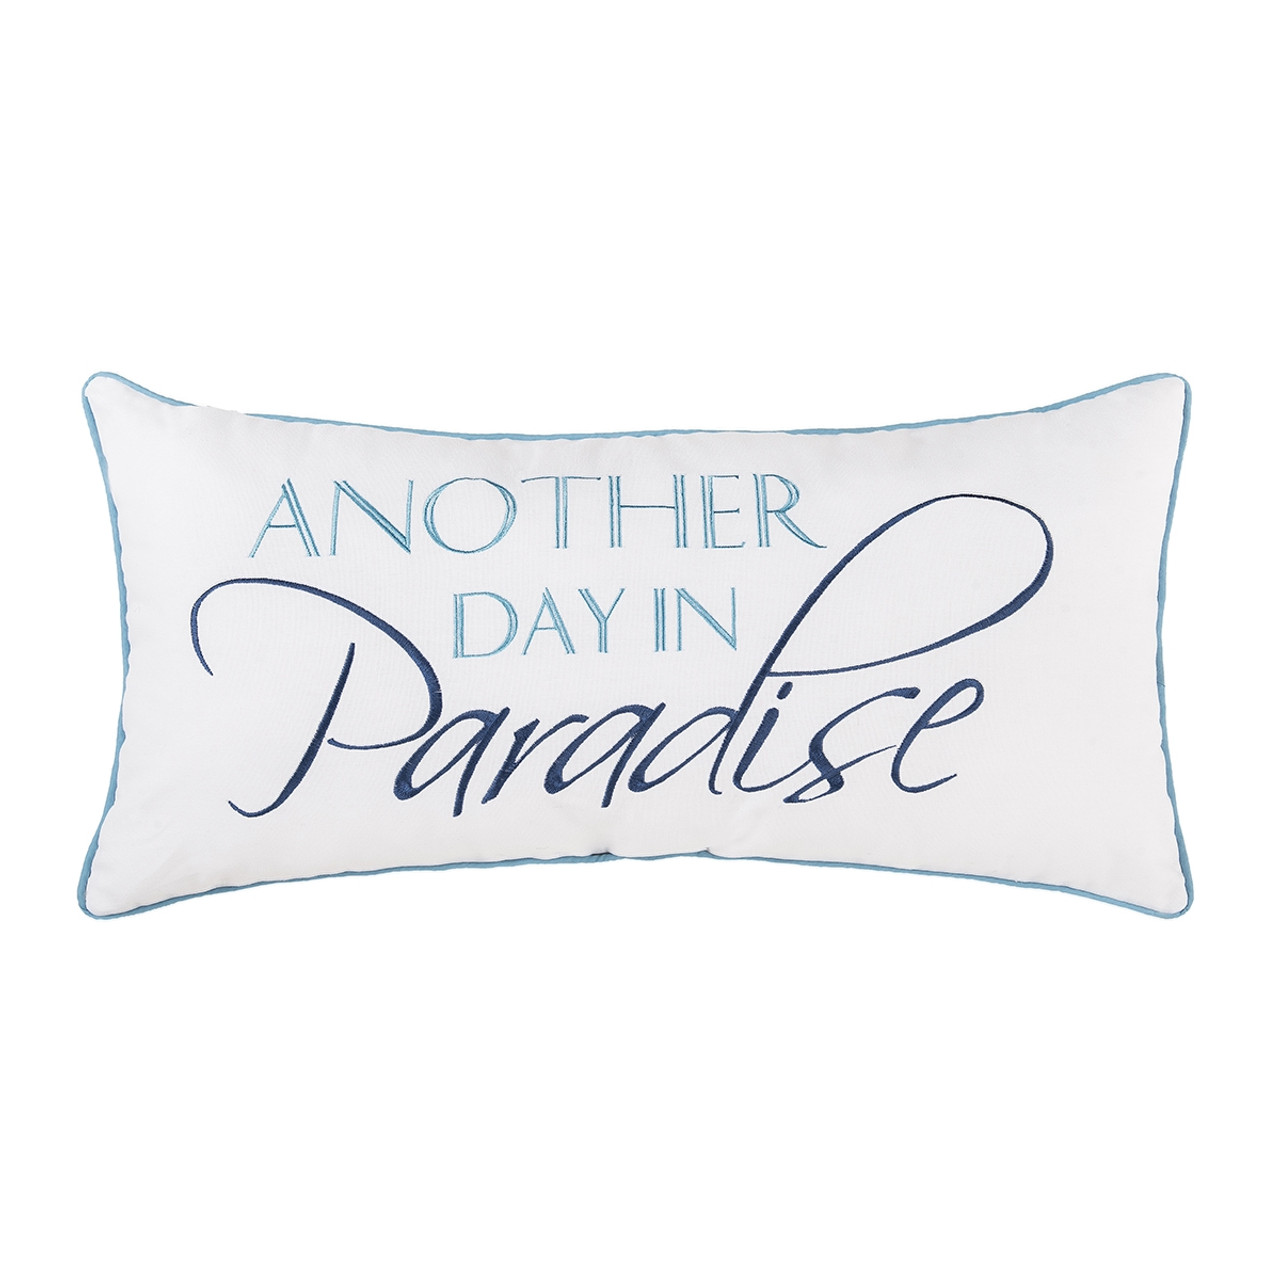 https://cdn11.bigcommerce.com/s-1iavbndjty/images/stencil/1280x1280/products/4074/10317/12747cccc861563360-another-day-in-paradise-pillow__43557.1695569236.jpg?c=1